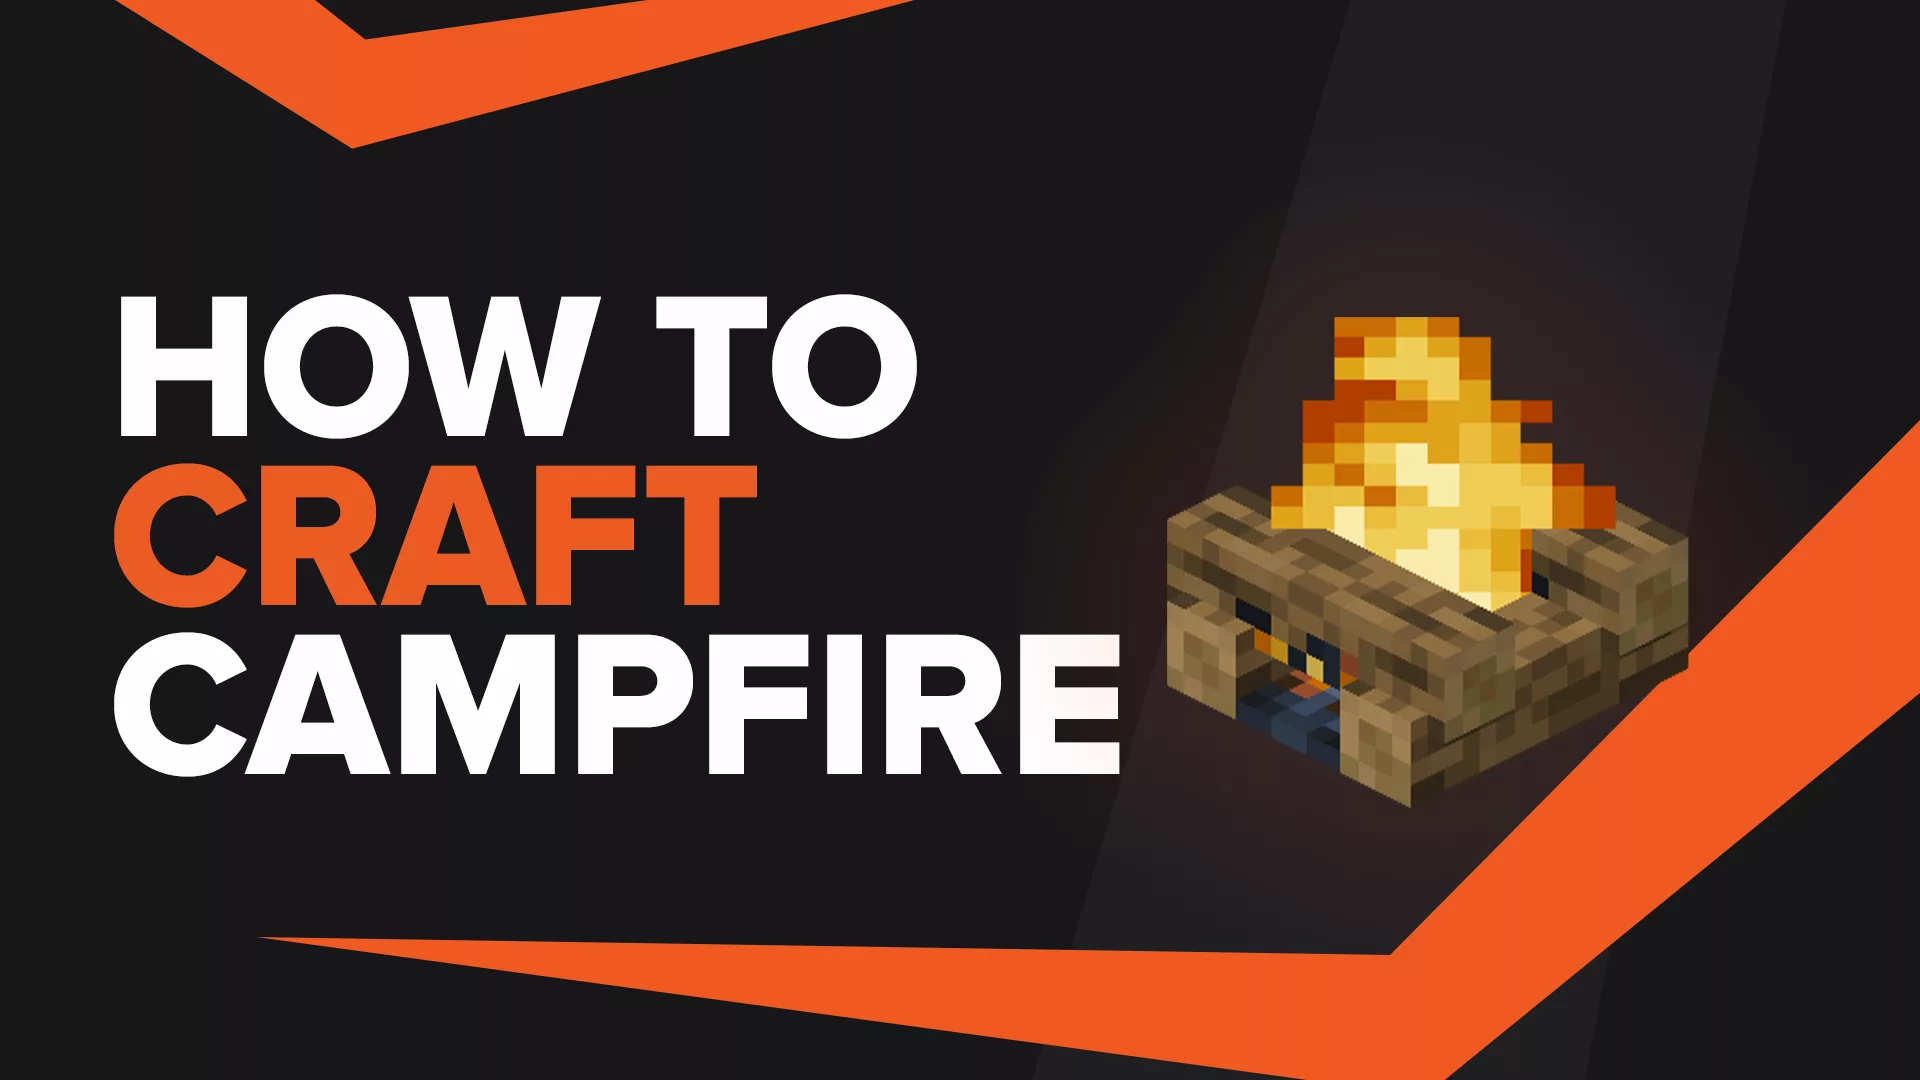 How To Make Campfire In Minecraft